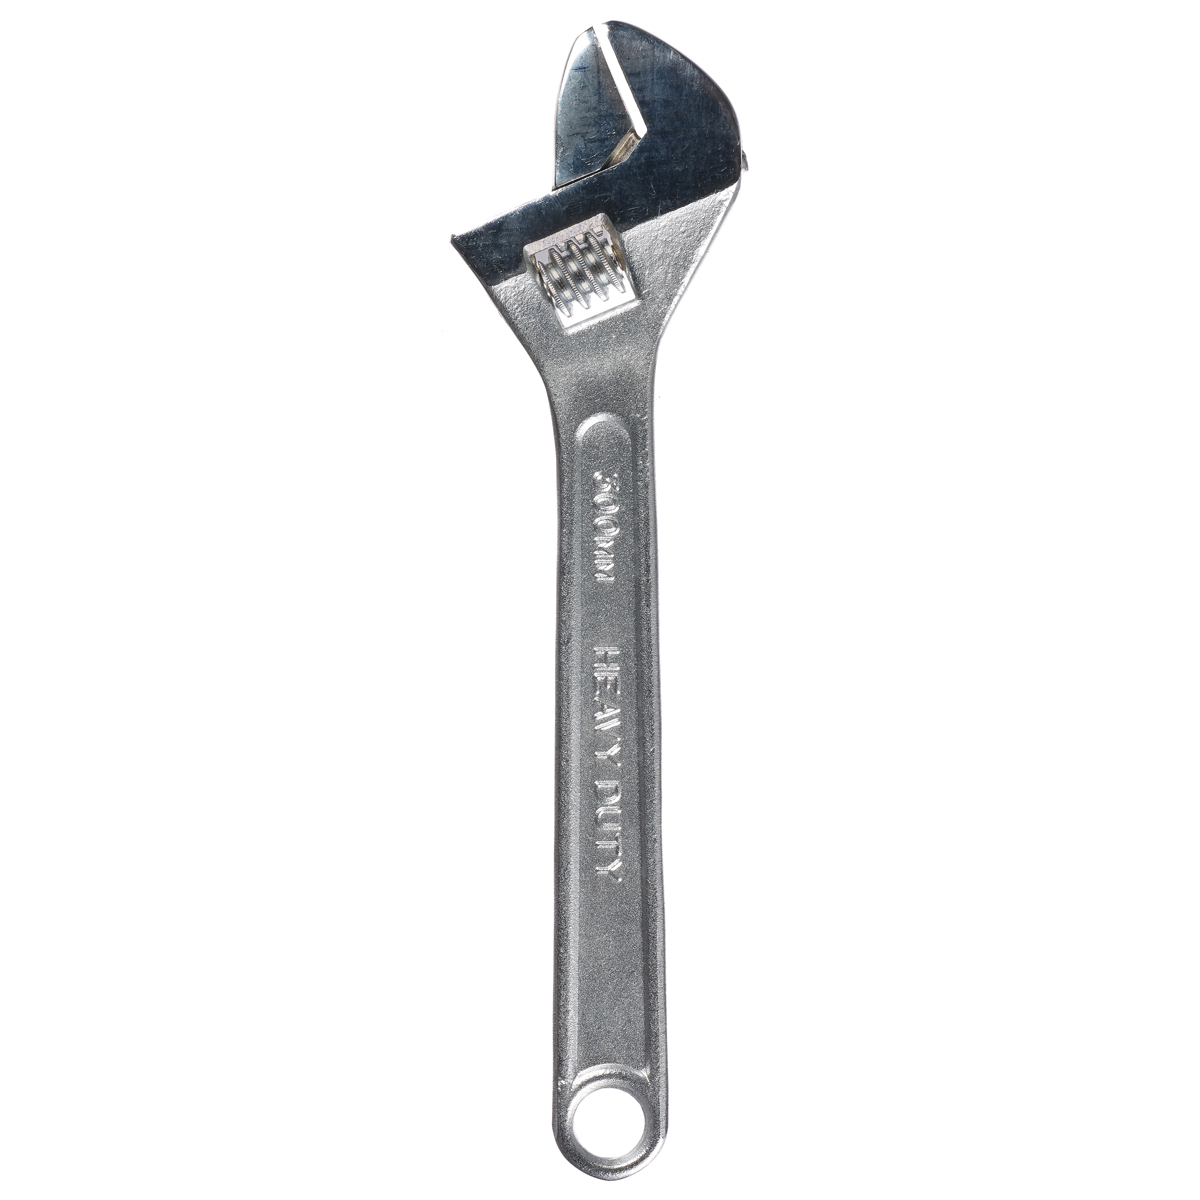 Amtech 15'' or 380mm  Adjustable Large Wrench C2200 